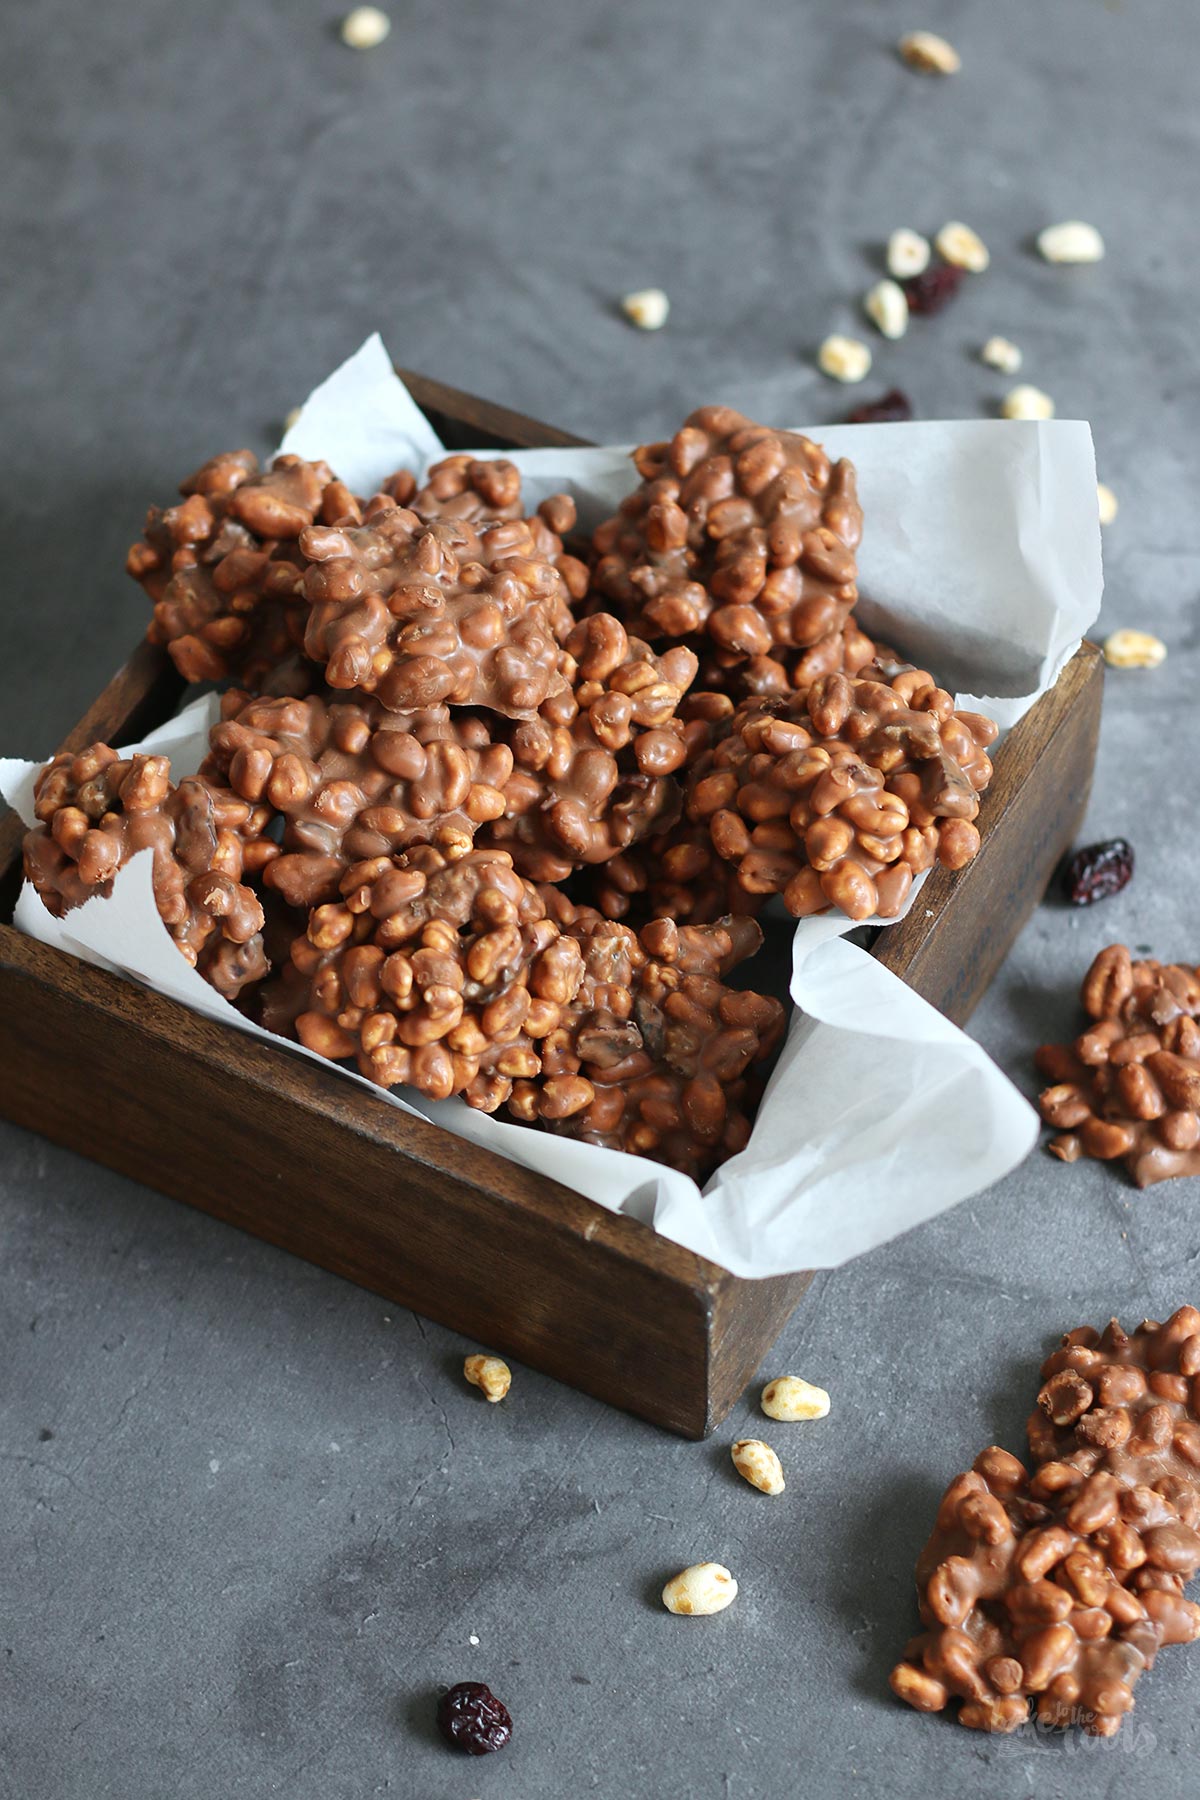 No-Bake Marabou Cookies | Bake to the roots